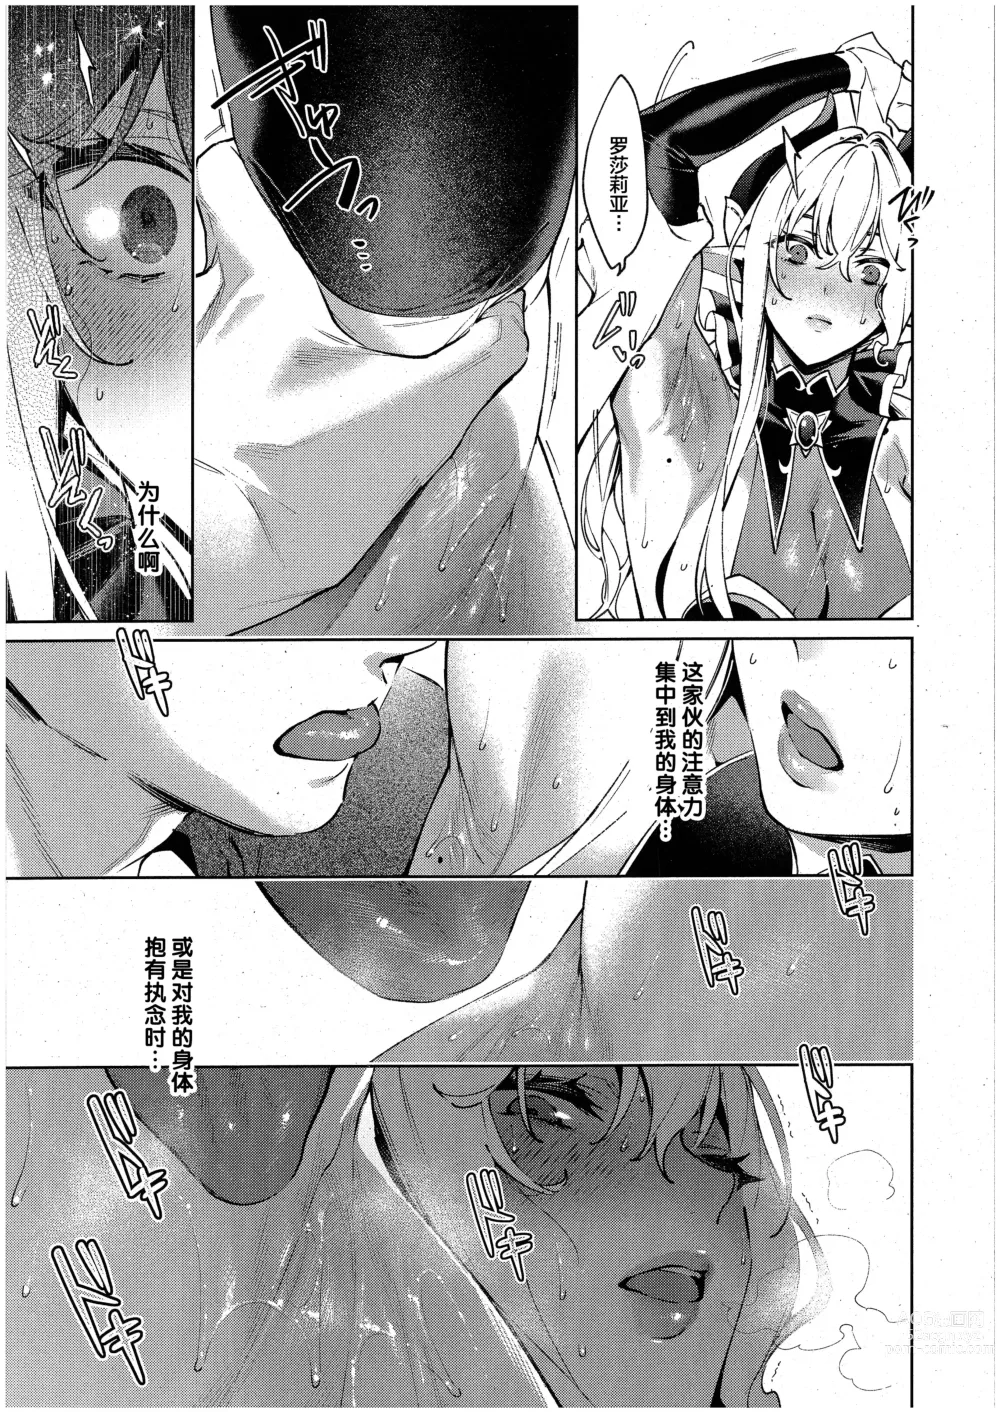 Page 11 of manga 欲望潘多拉31